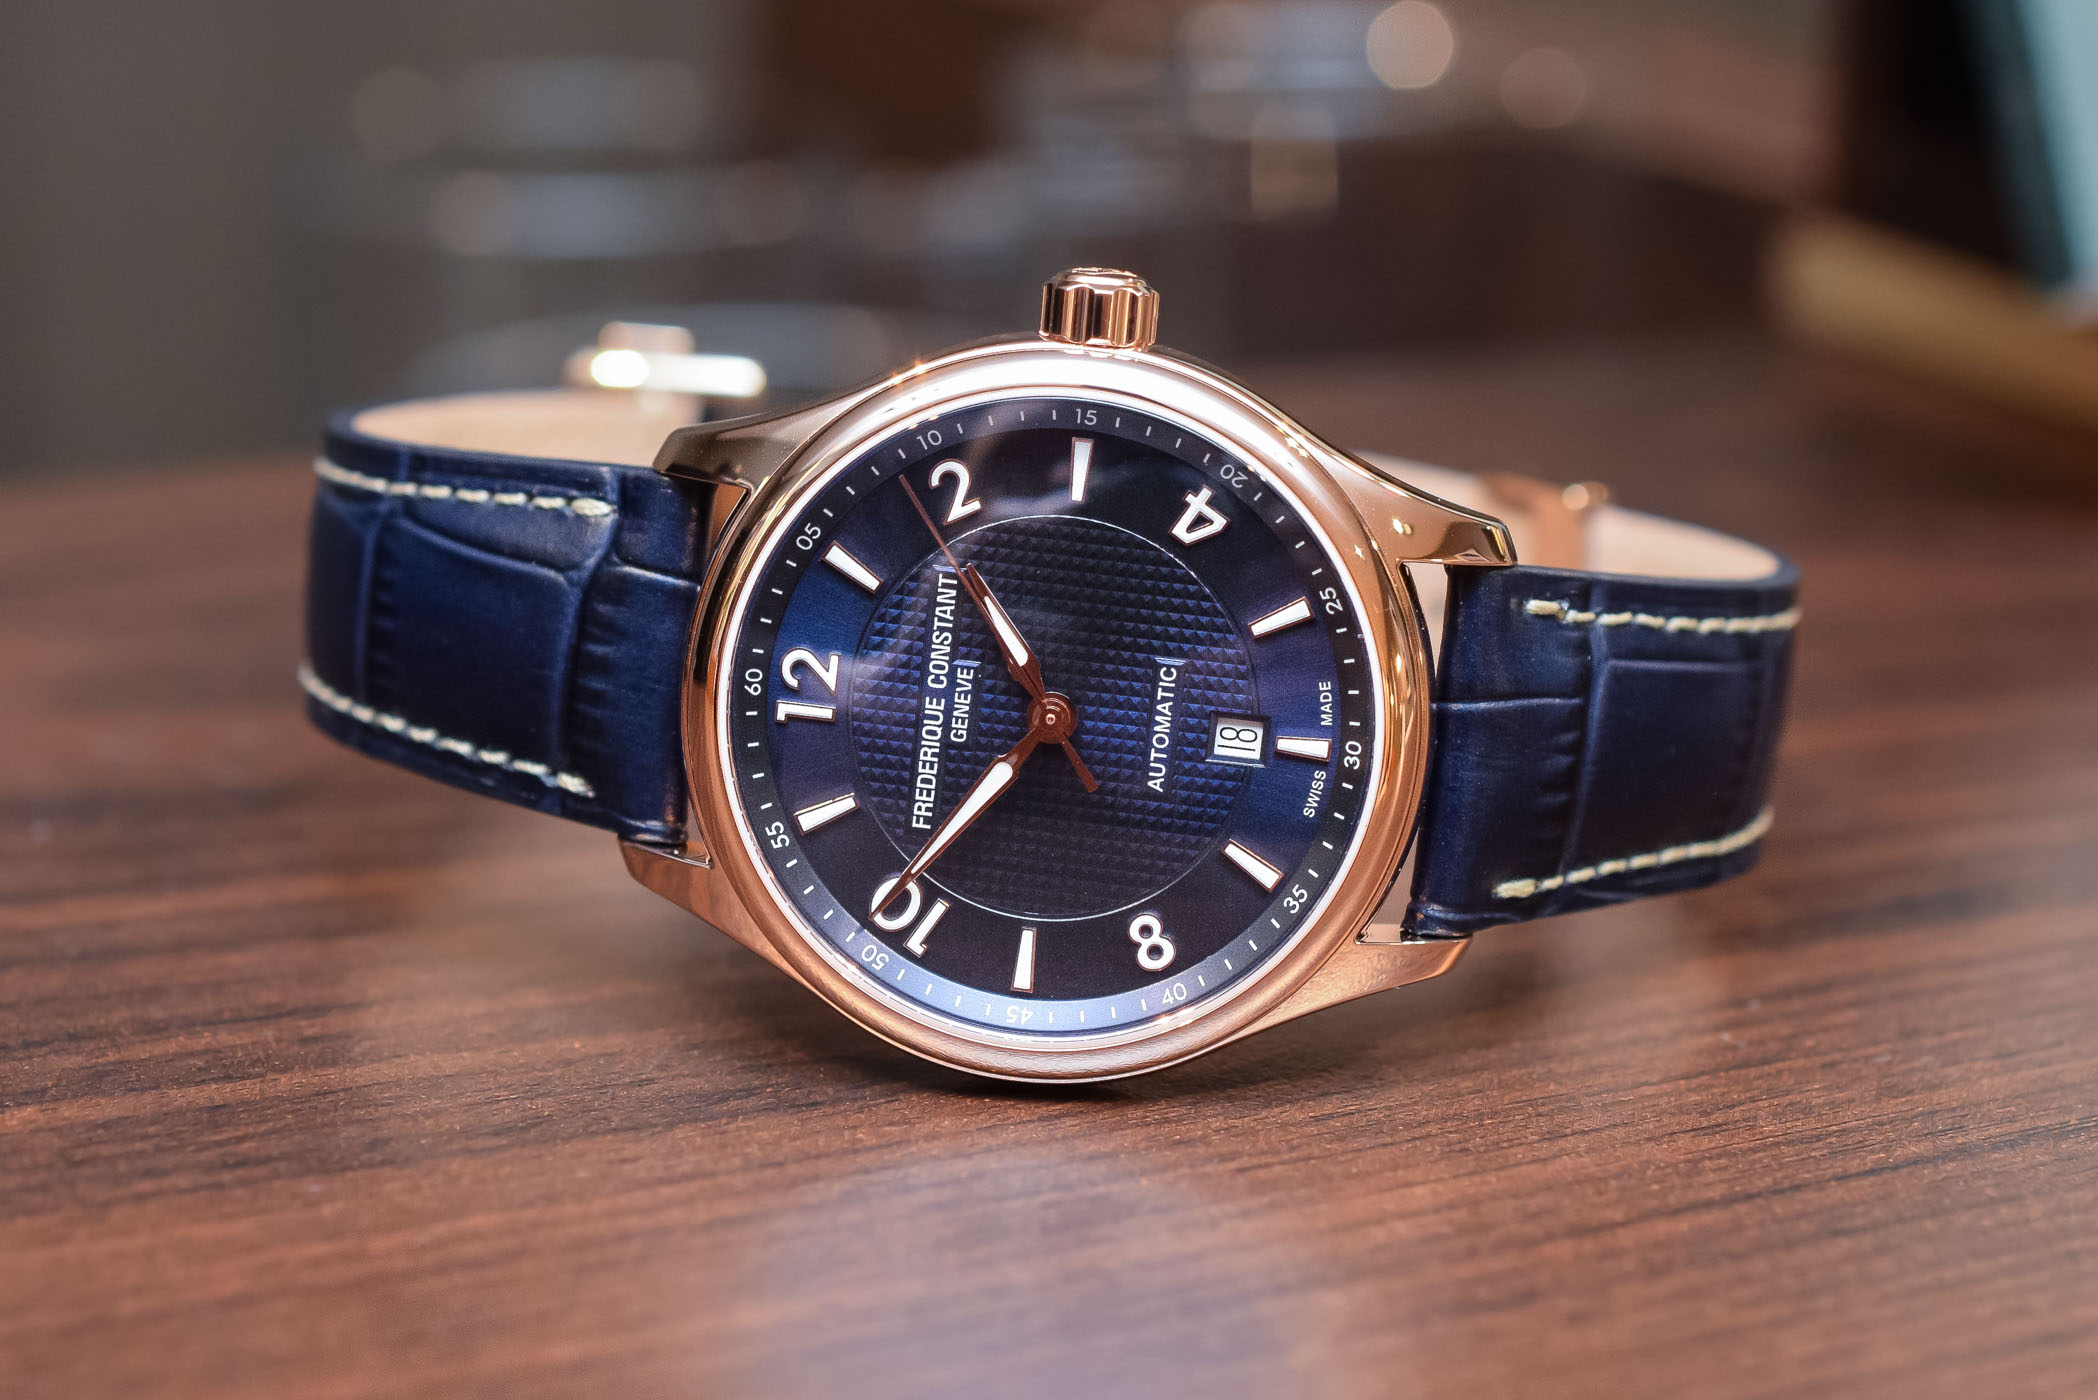 frederique constant runabout gmt watch